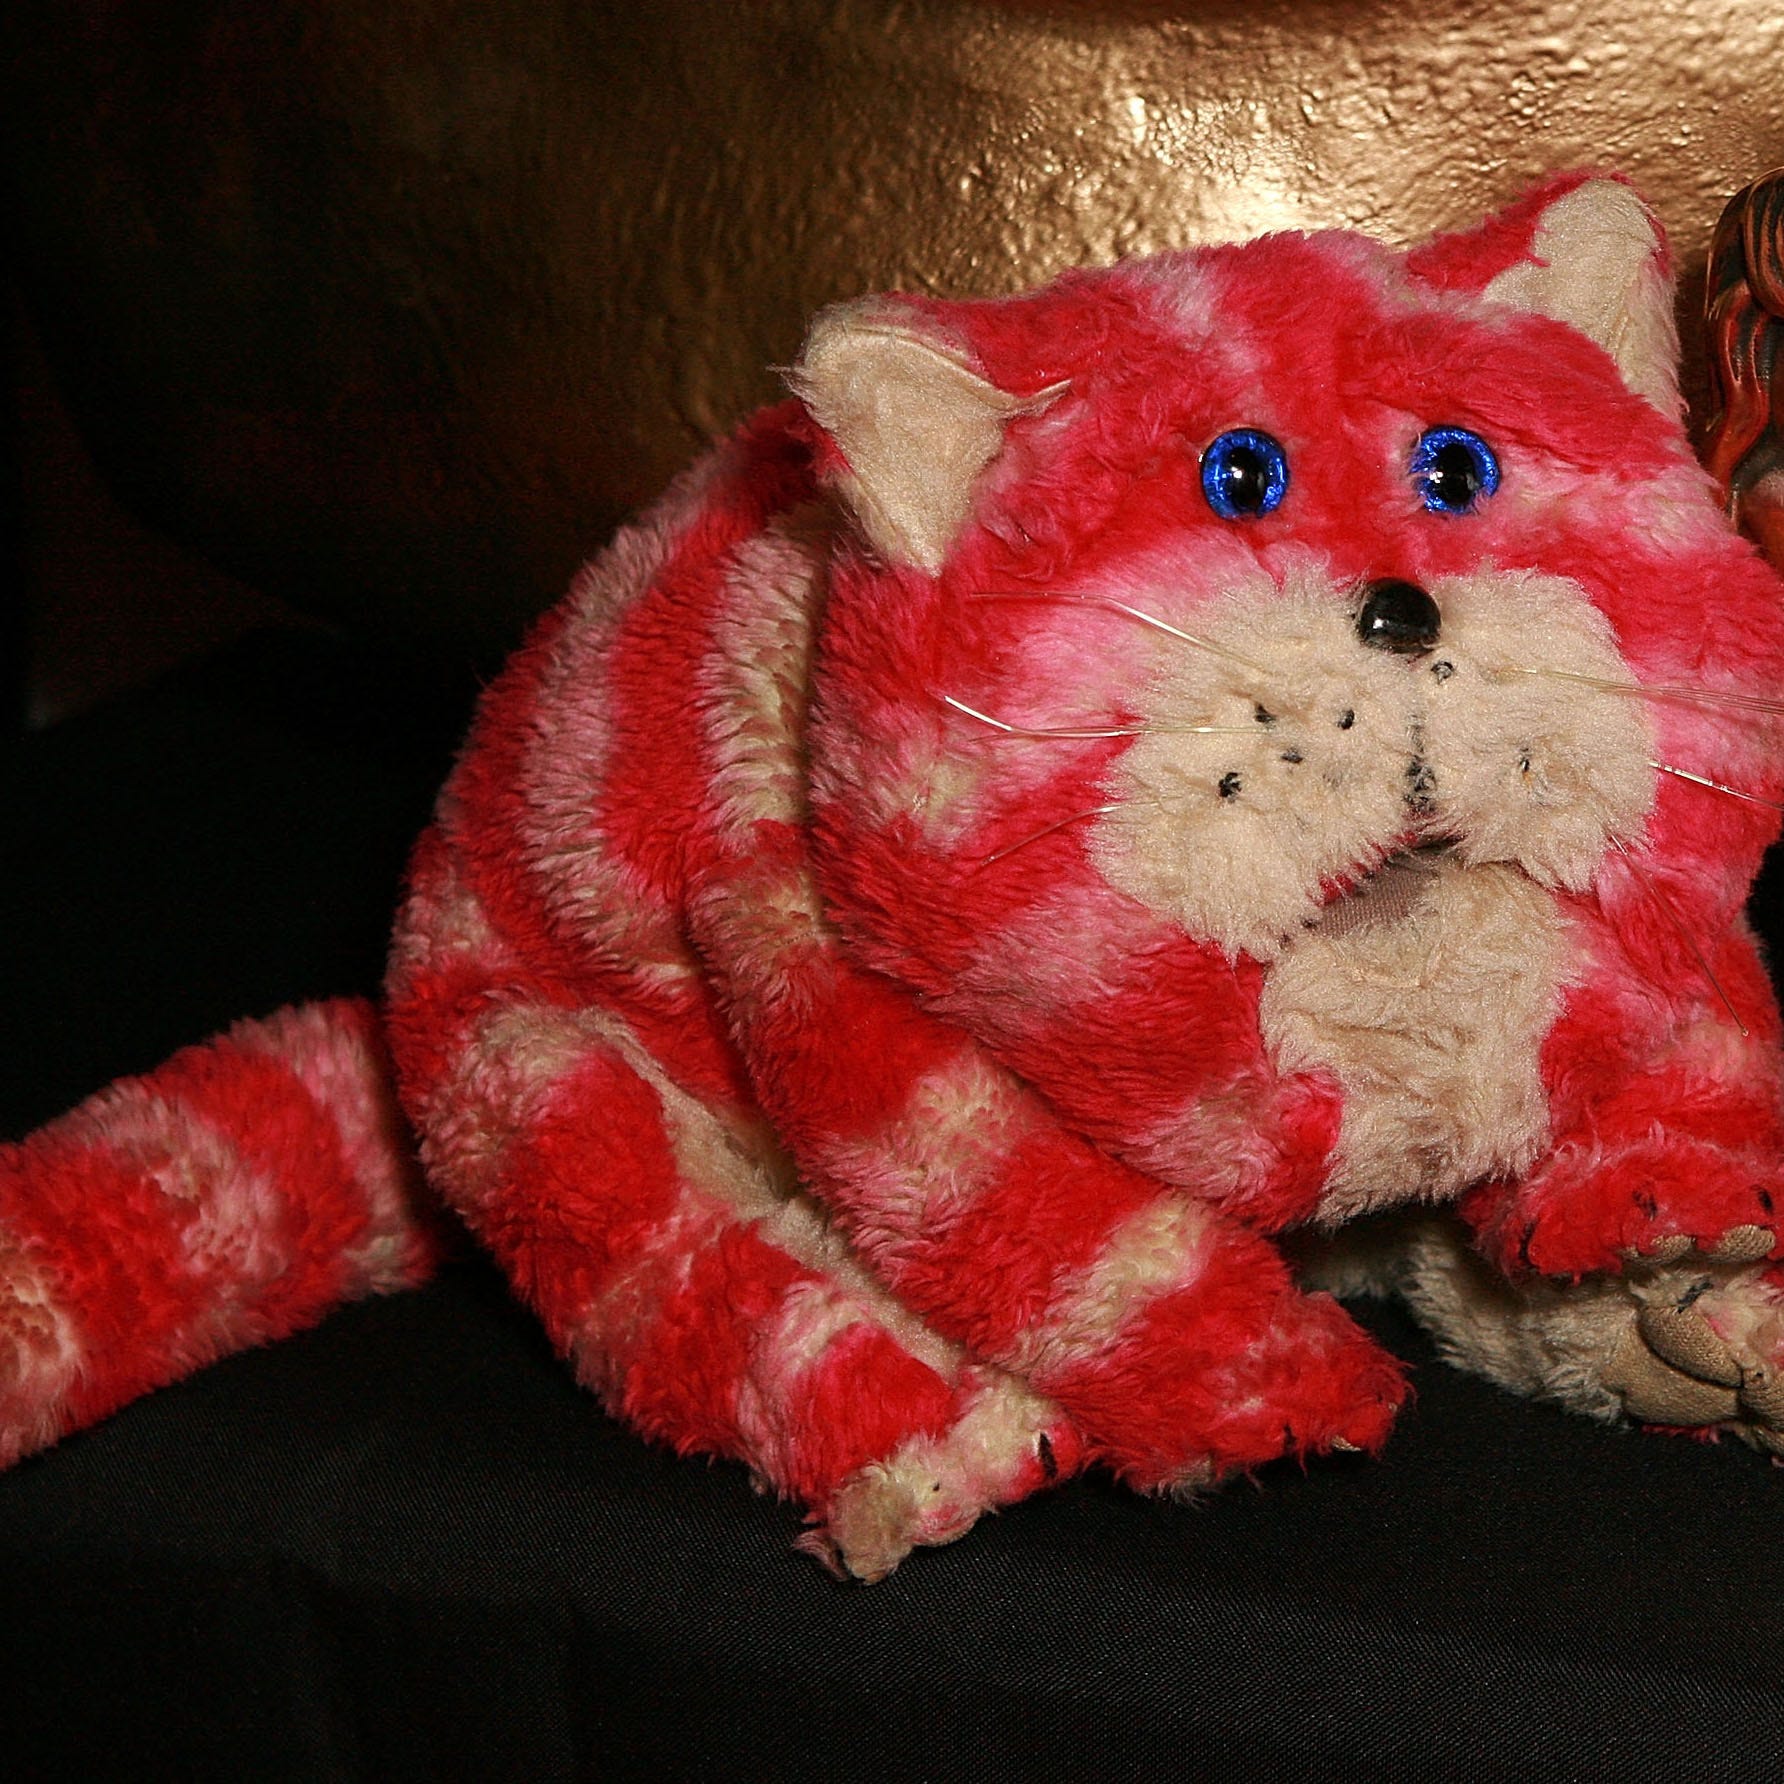 Textile, Red, Toy, Stuffed toy, Carnivore, Carmine, Fur, Snout, Plush, Felidae, 